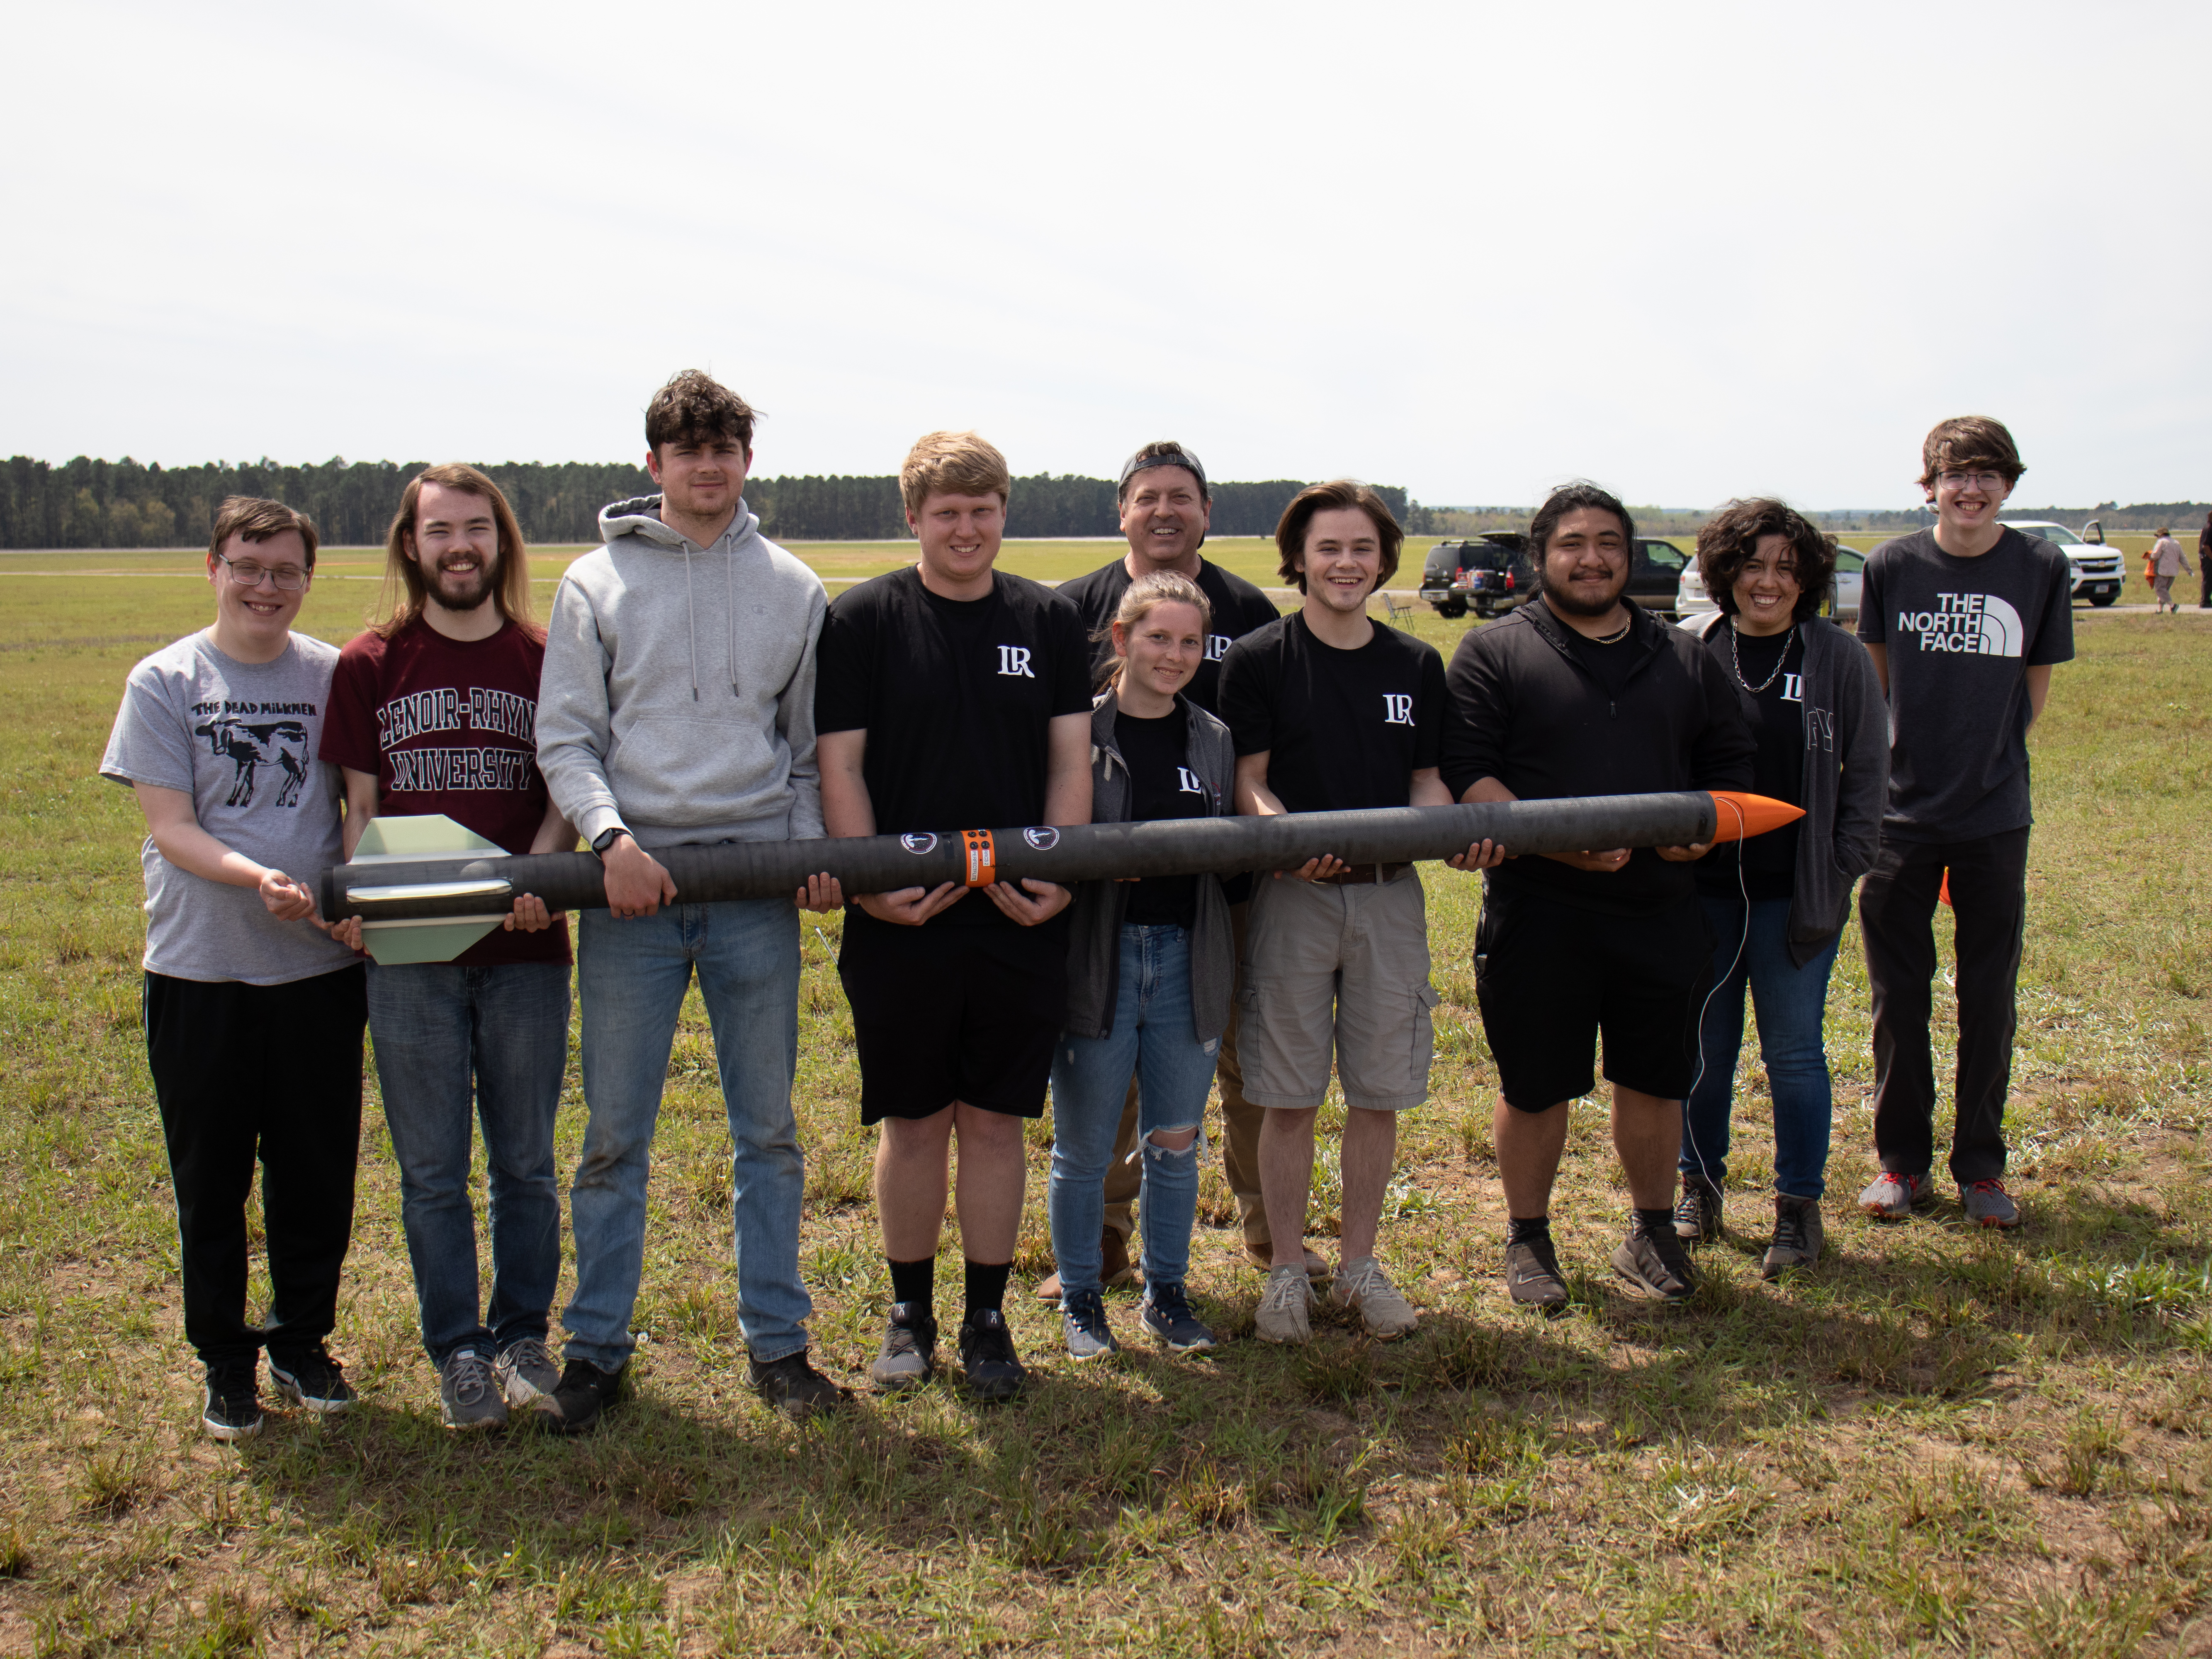 A group of students stand outside and hold a prototype rocket